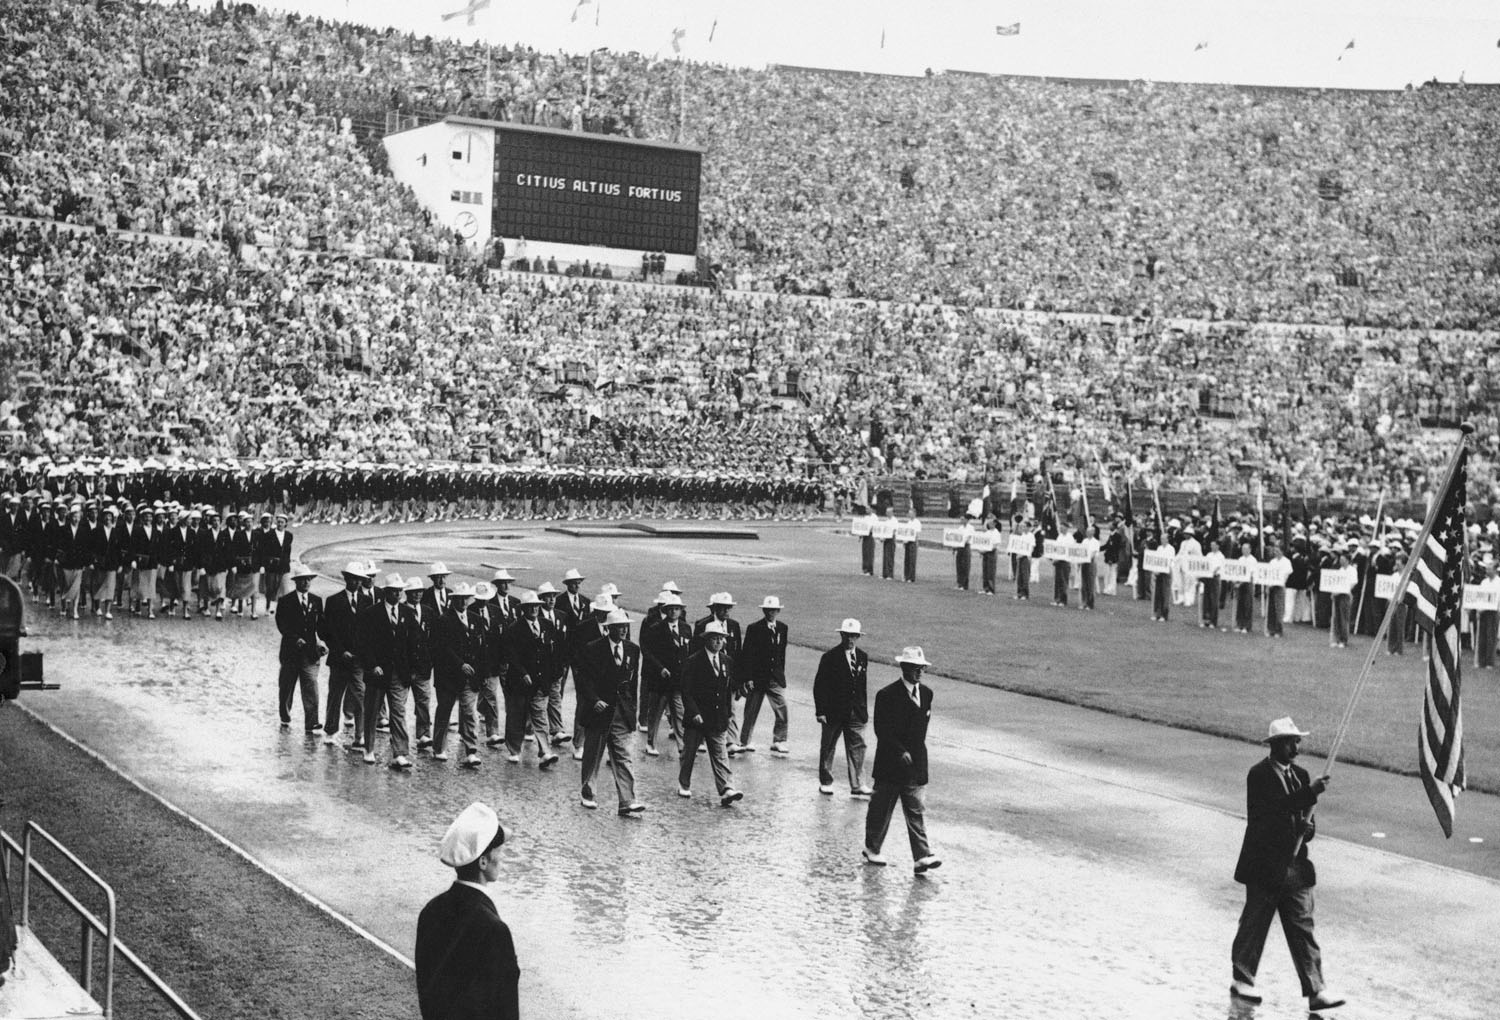 Bobsledder Jim Bickford, carries the American flag during the opening ceremonies for the 1952 games at Oslo.